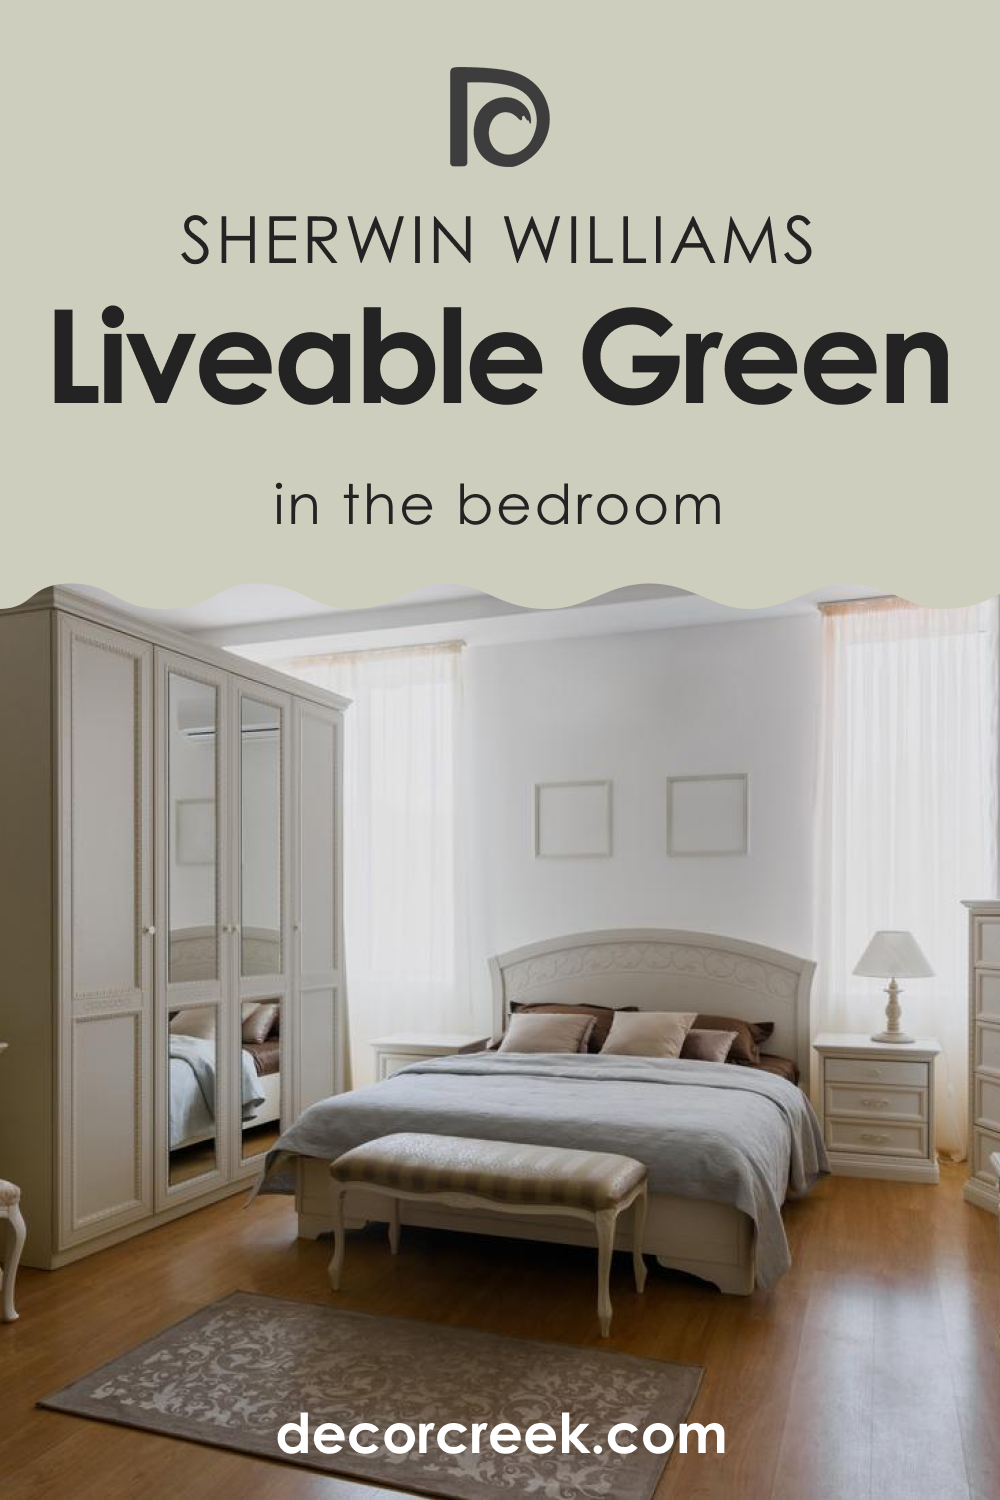 Liveable Green SW 6176 in a Bedroom